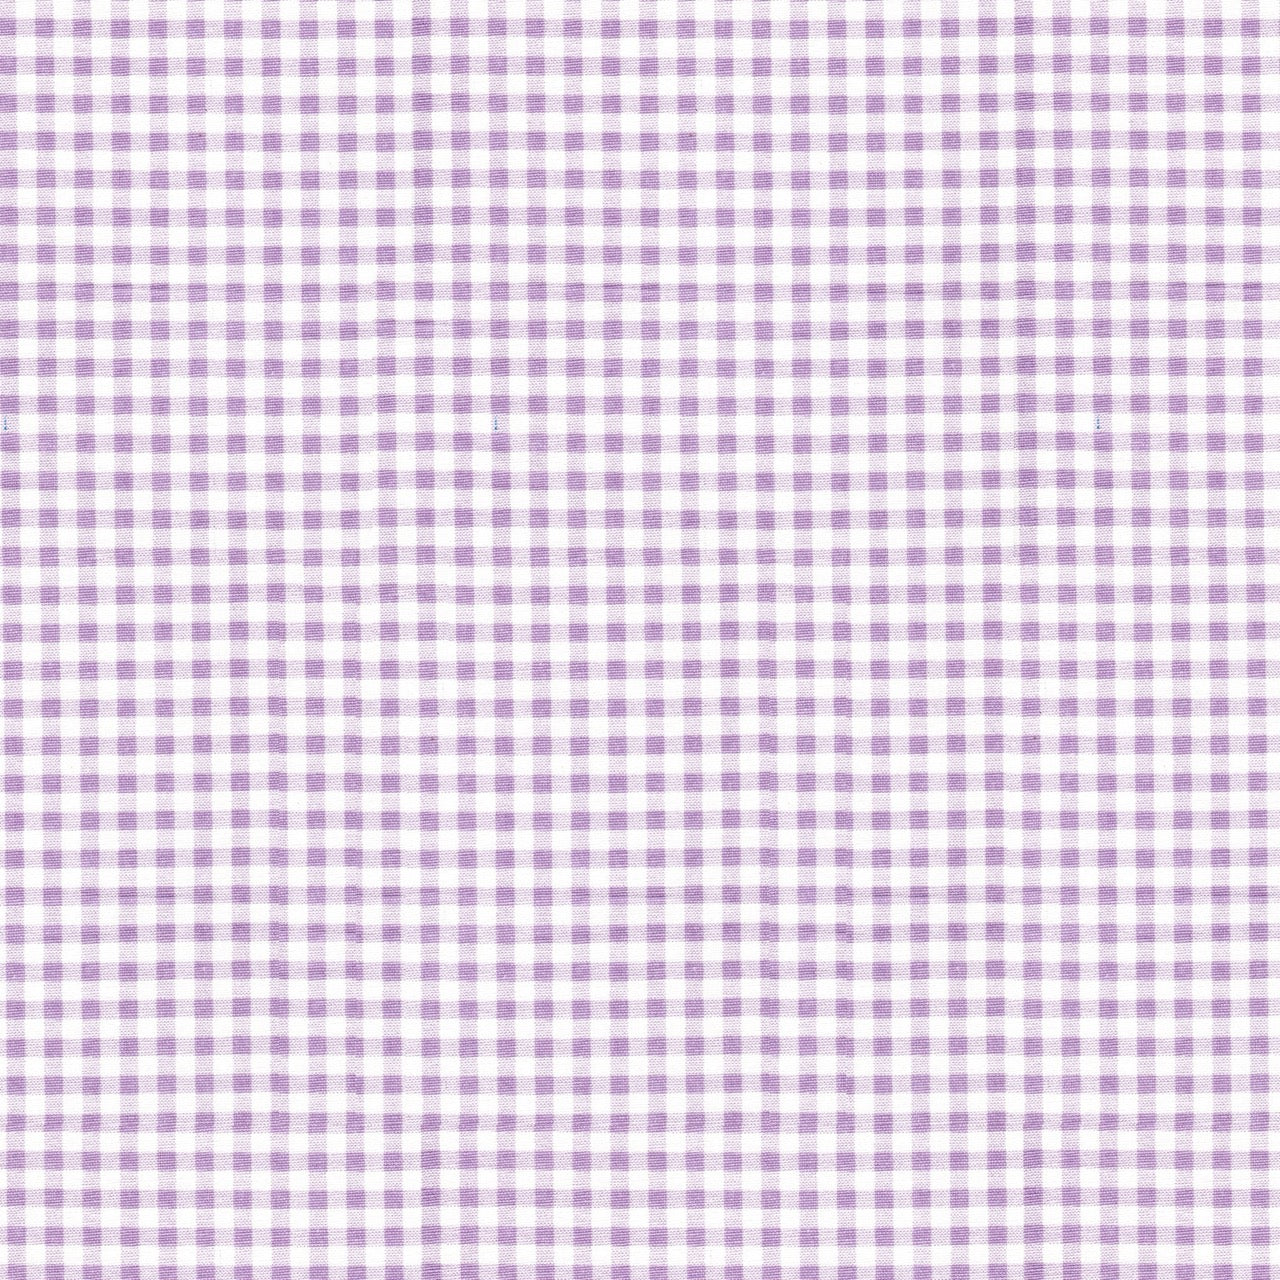 Gathered Bedskirt in Orchid Large Gingham Check on White